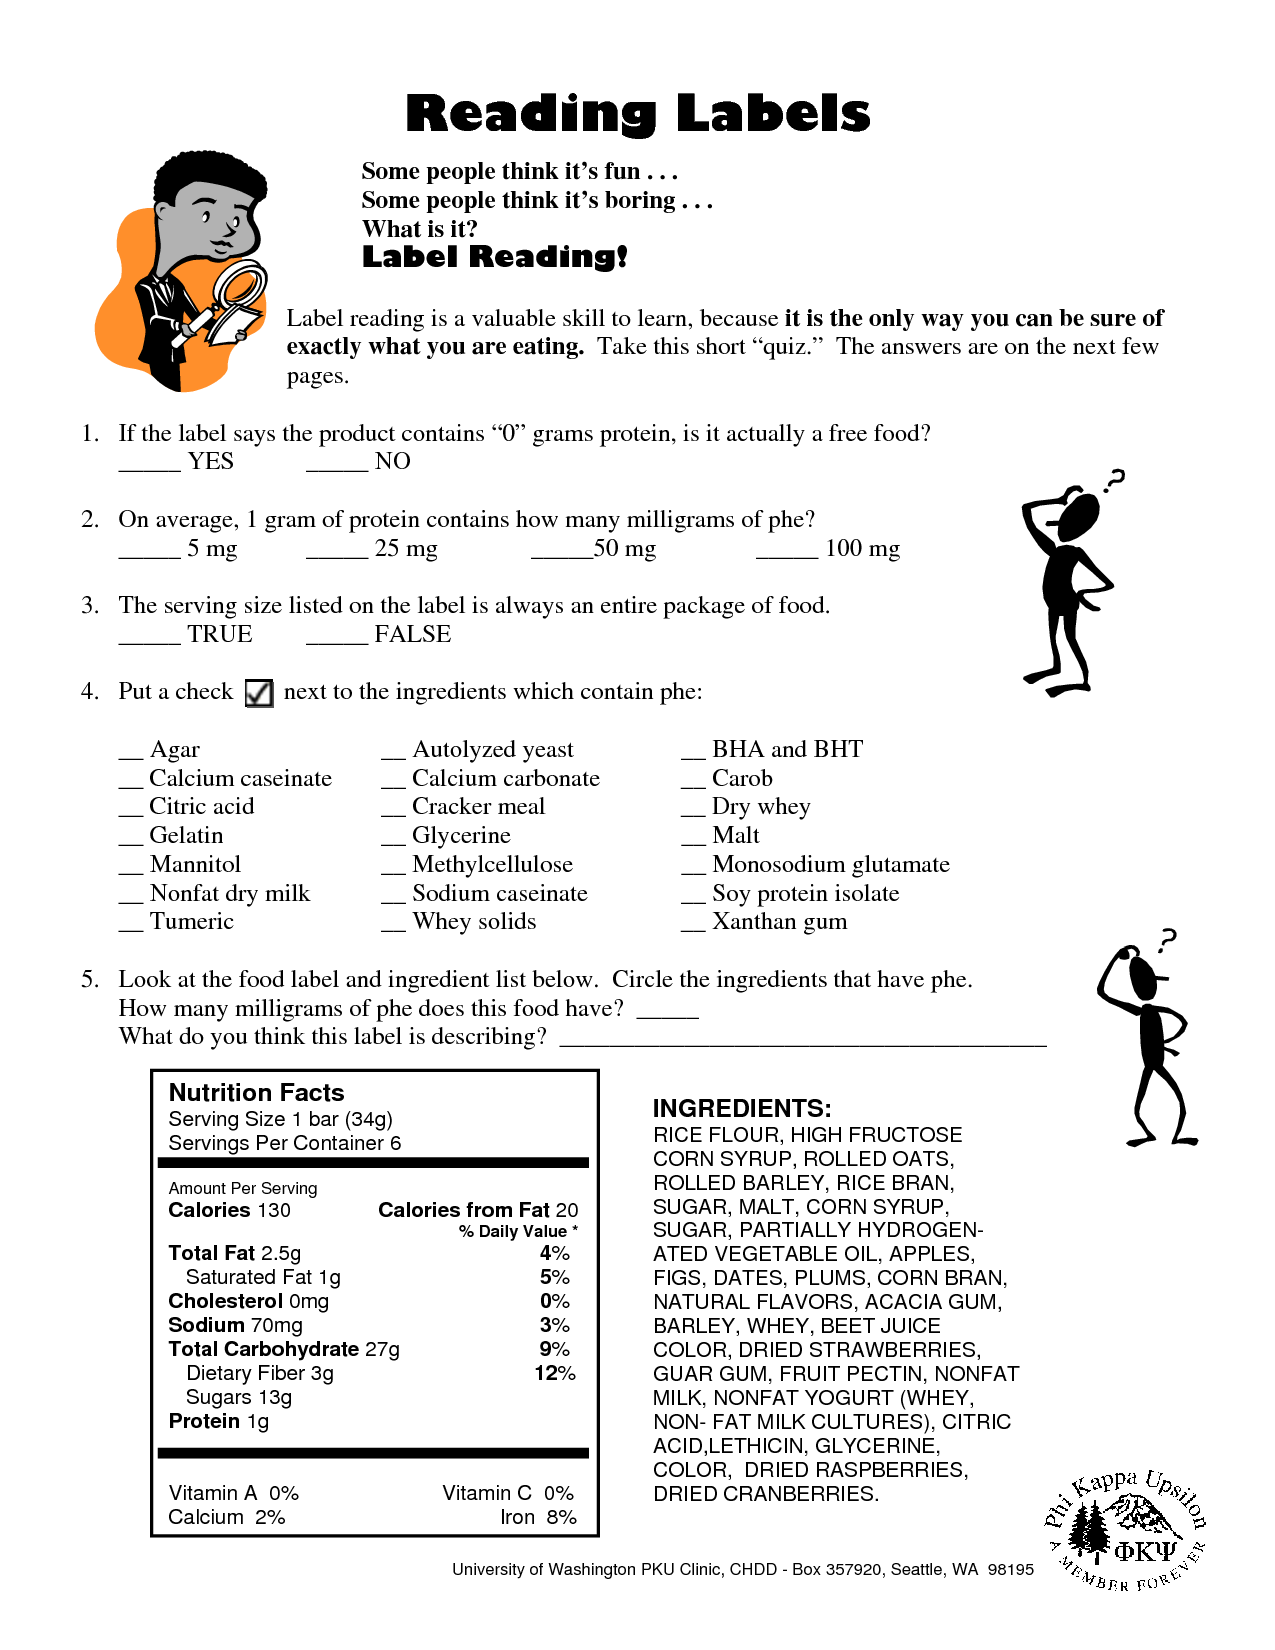 Reading Labels Worksheets with Questions